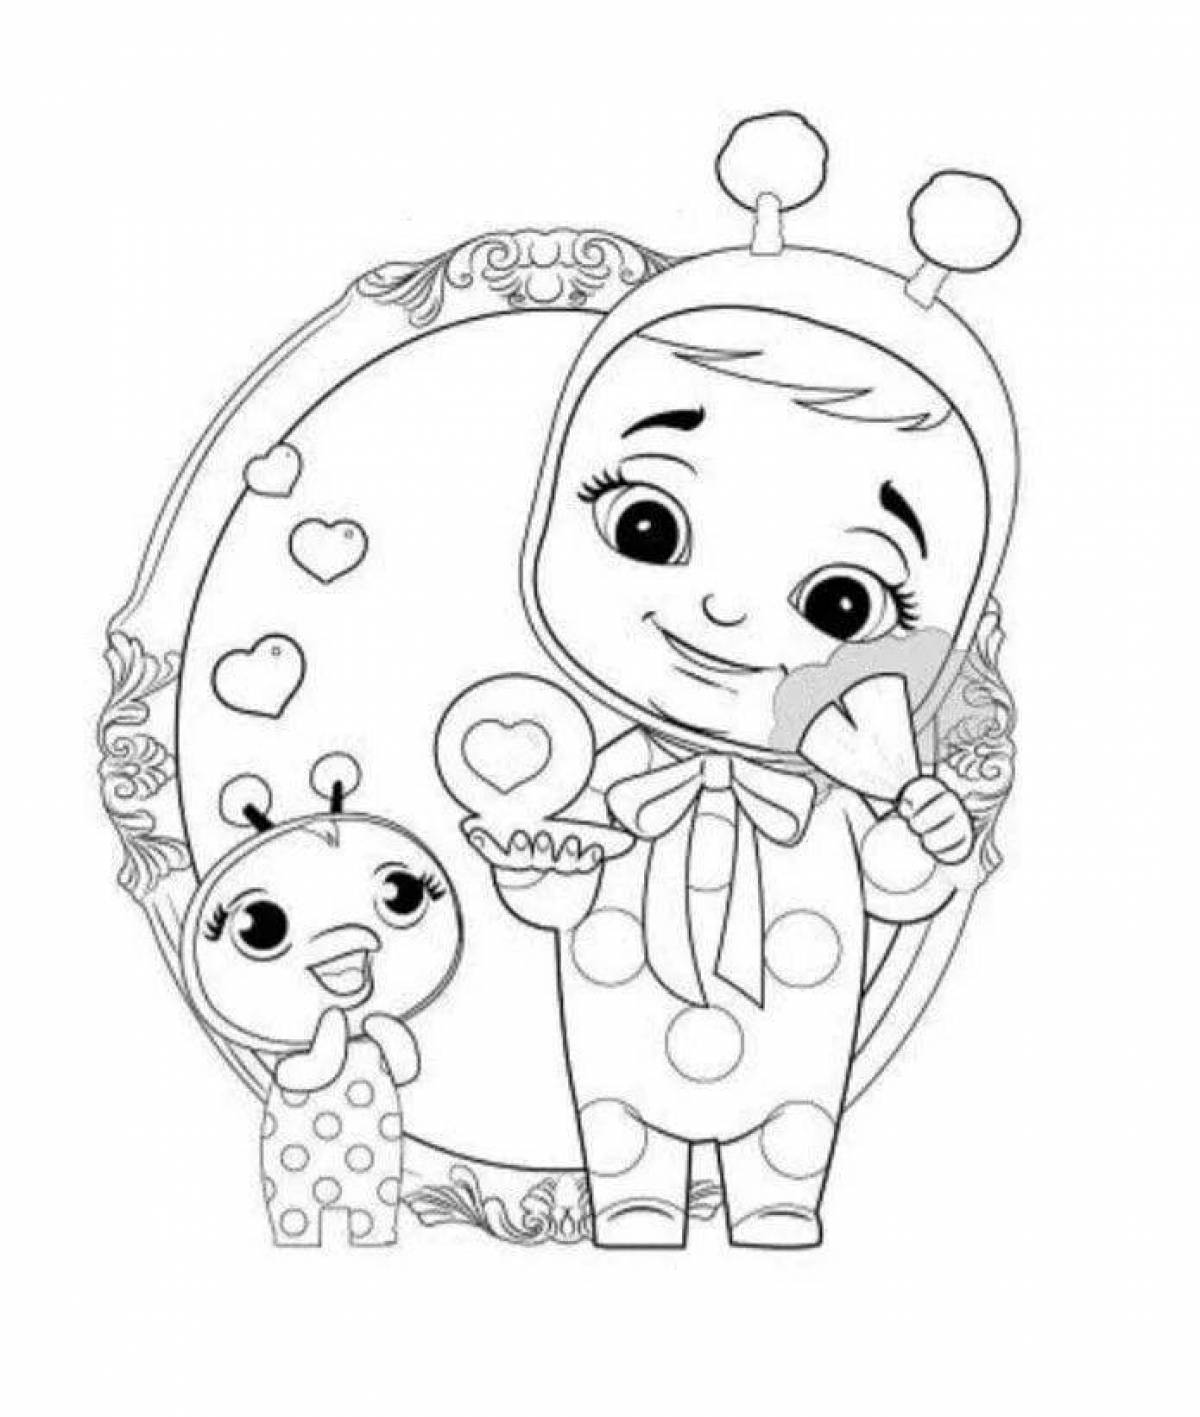 Adorable kreis baby coloring page